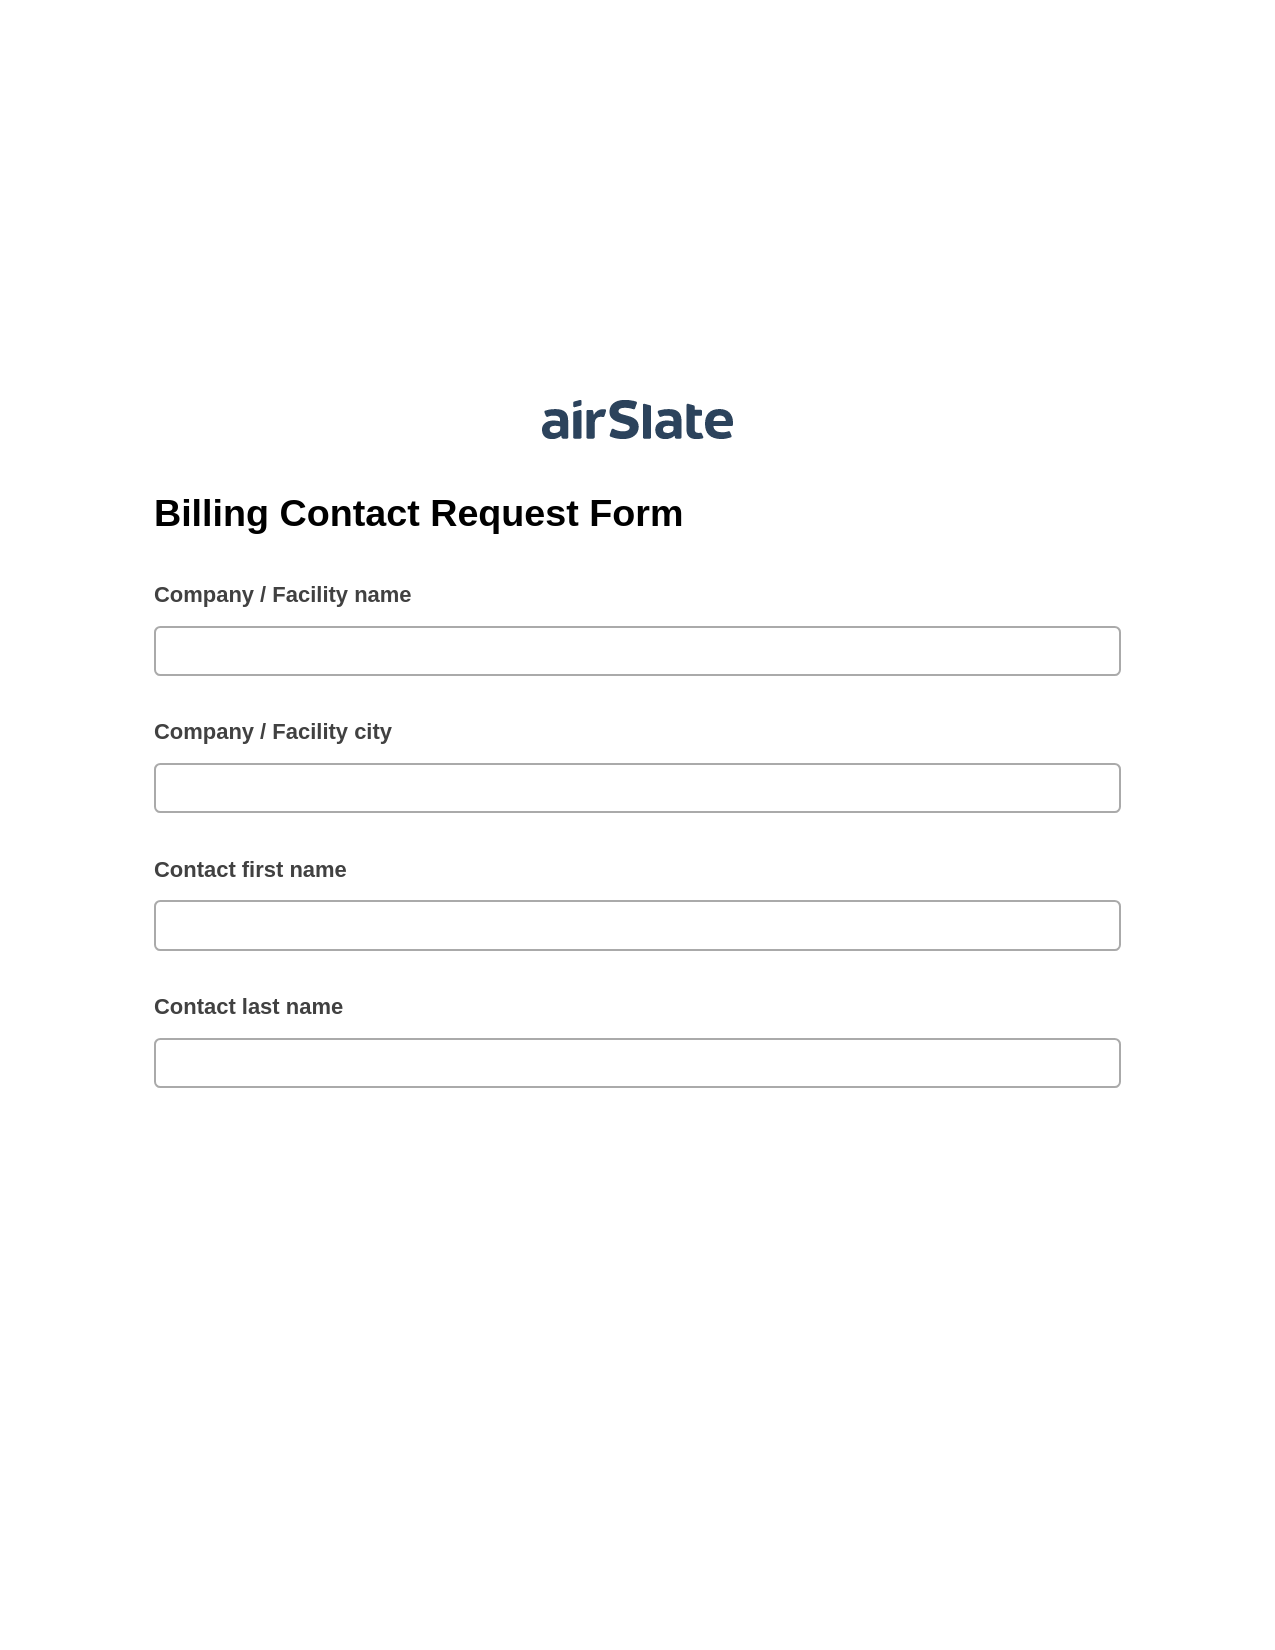 Multirole Billing Contact Request Form Pre-fill Dropdown from Airtable, Update MS Dynamics 365 Records Bot, Export to Smartsheet